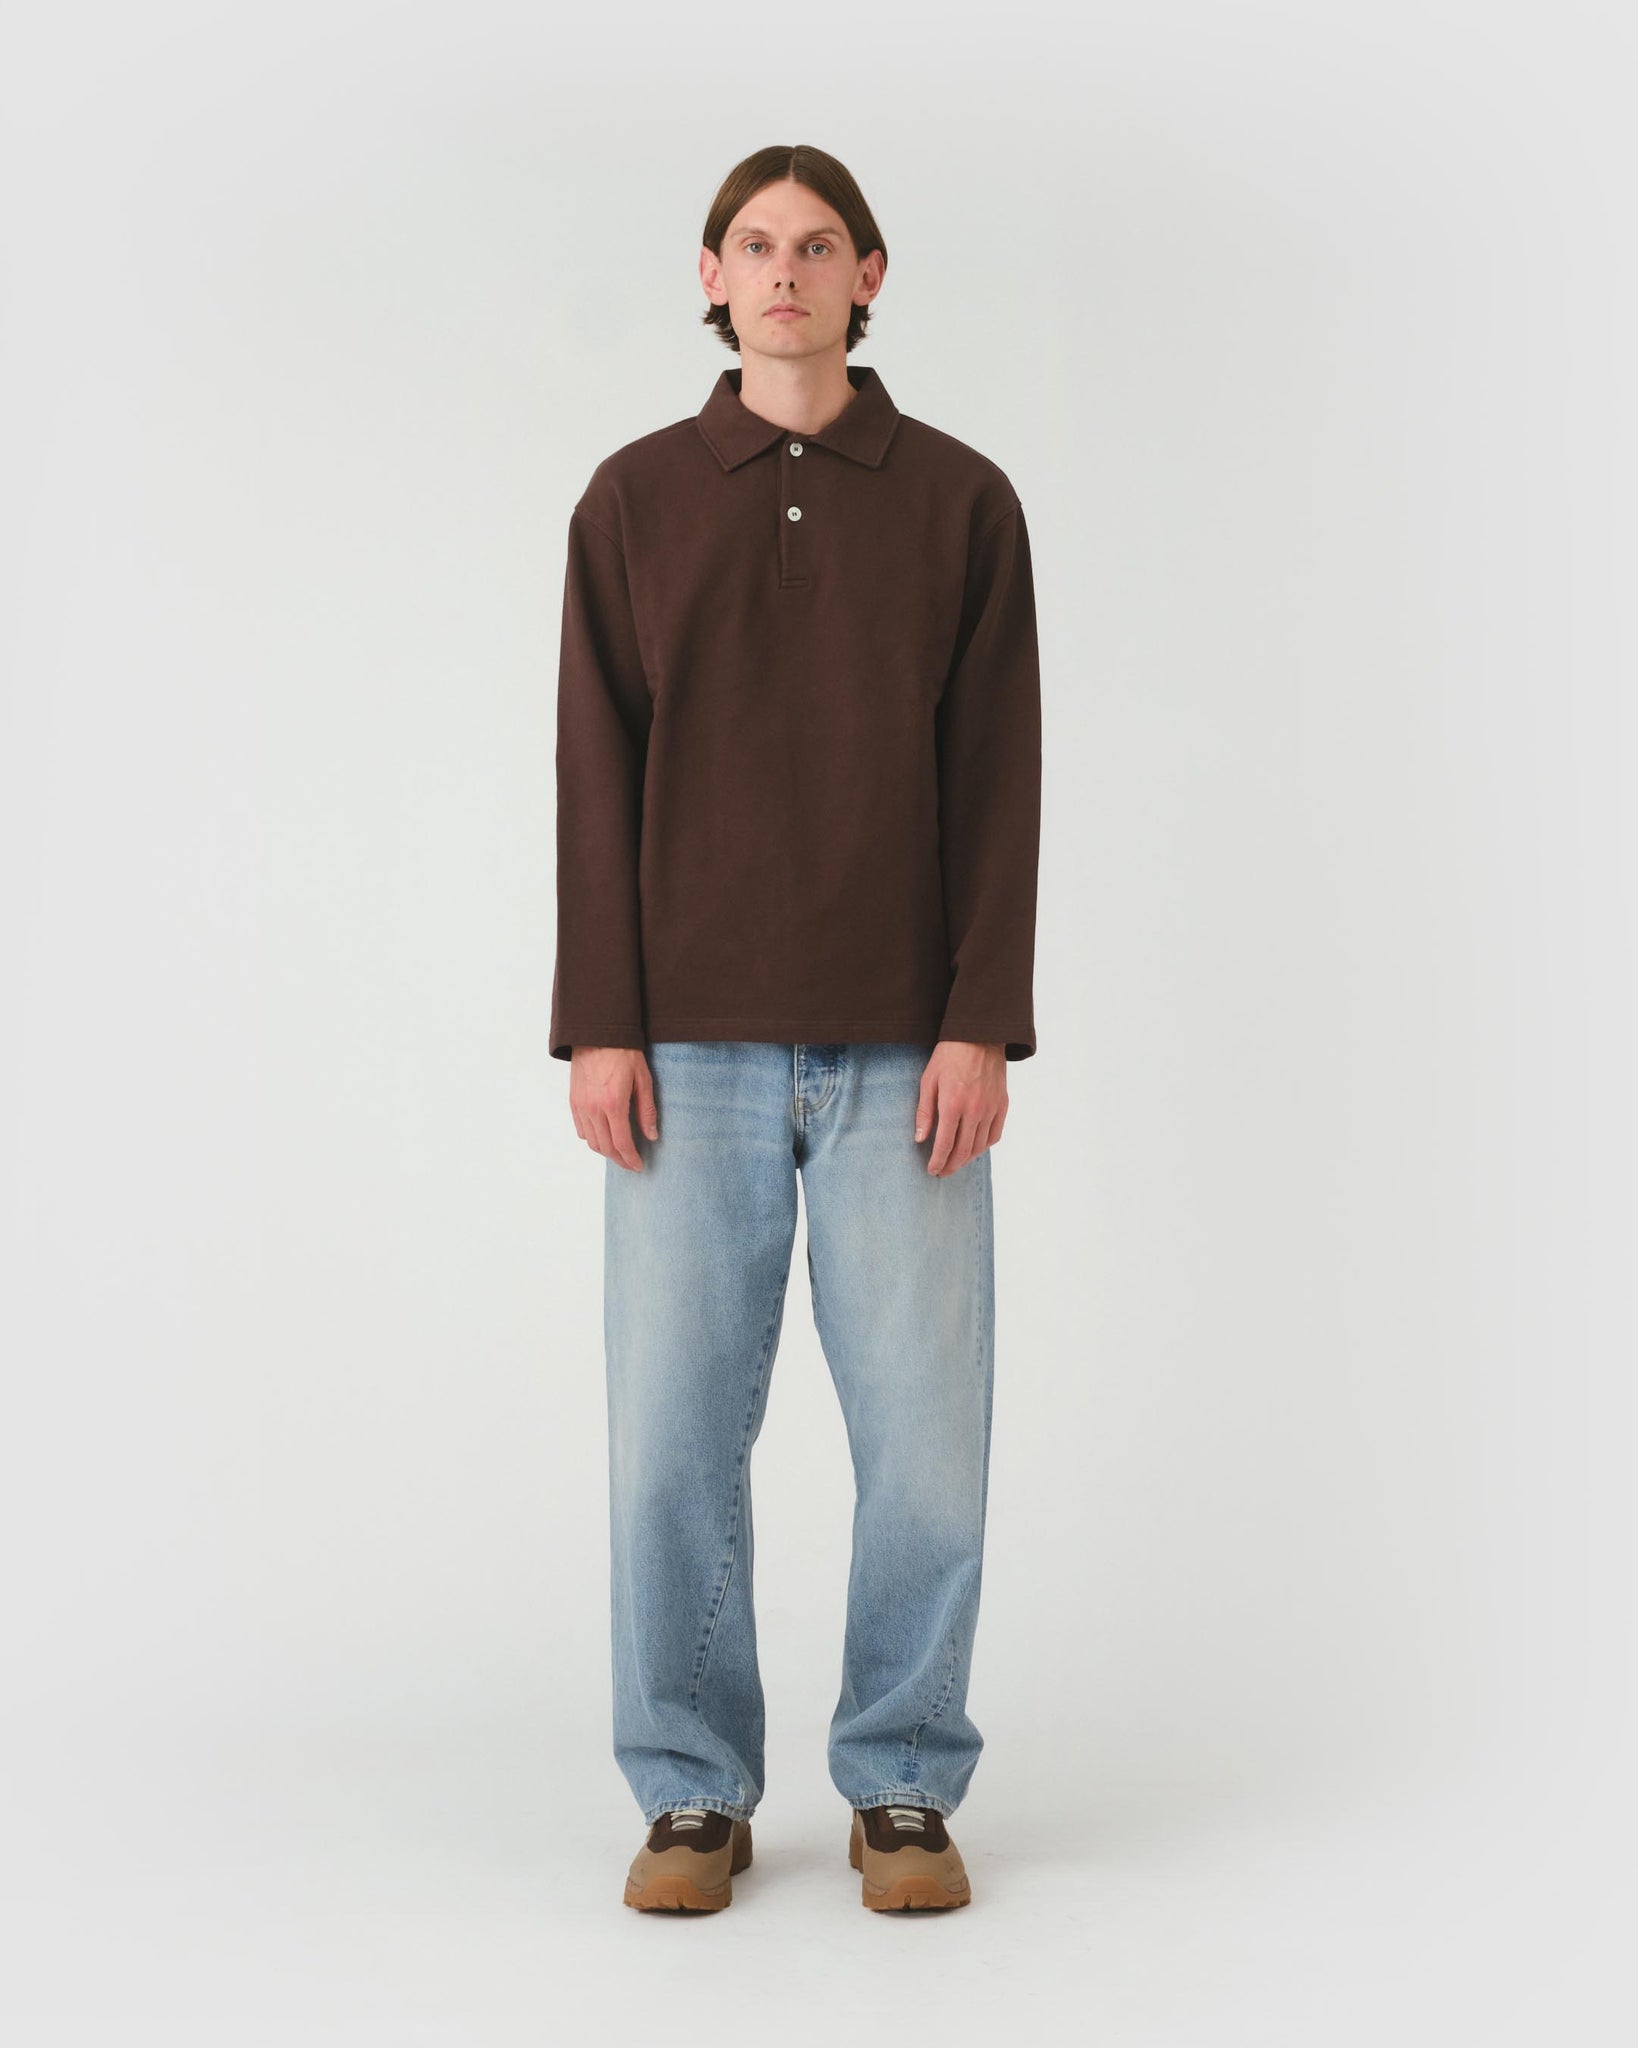 Another Polo Shirt 1.0 - Antique Brown